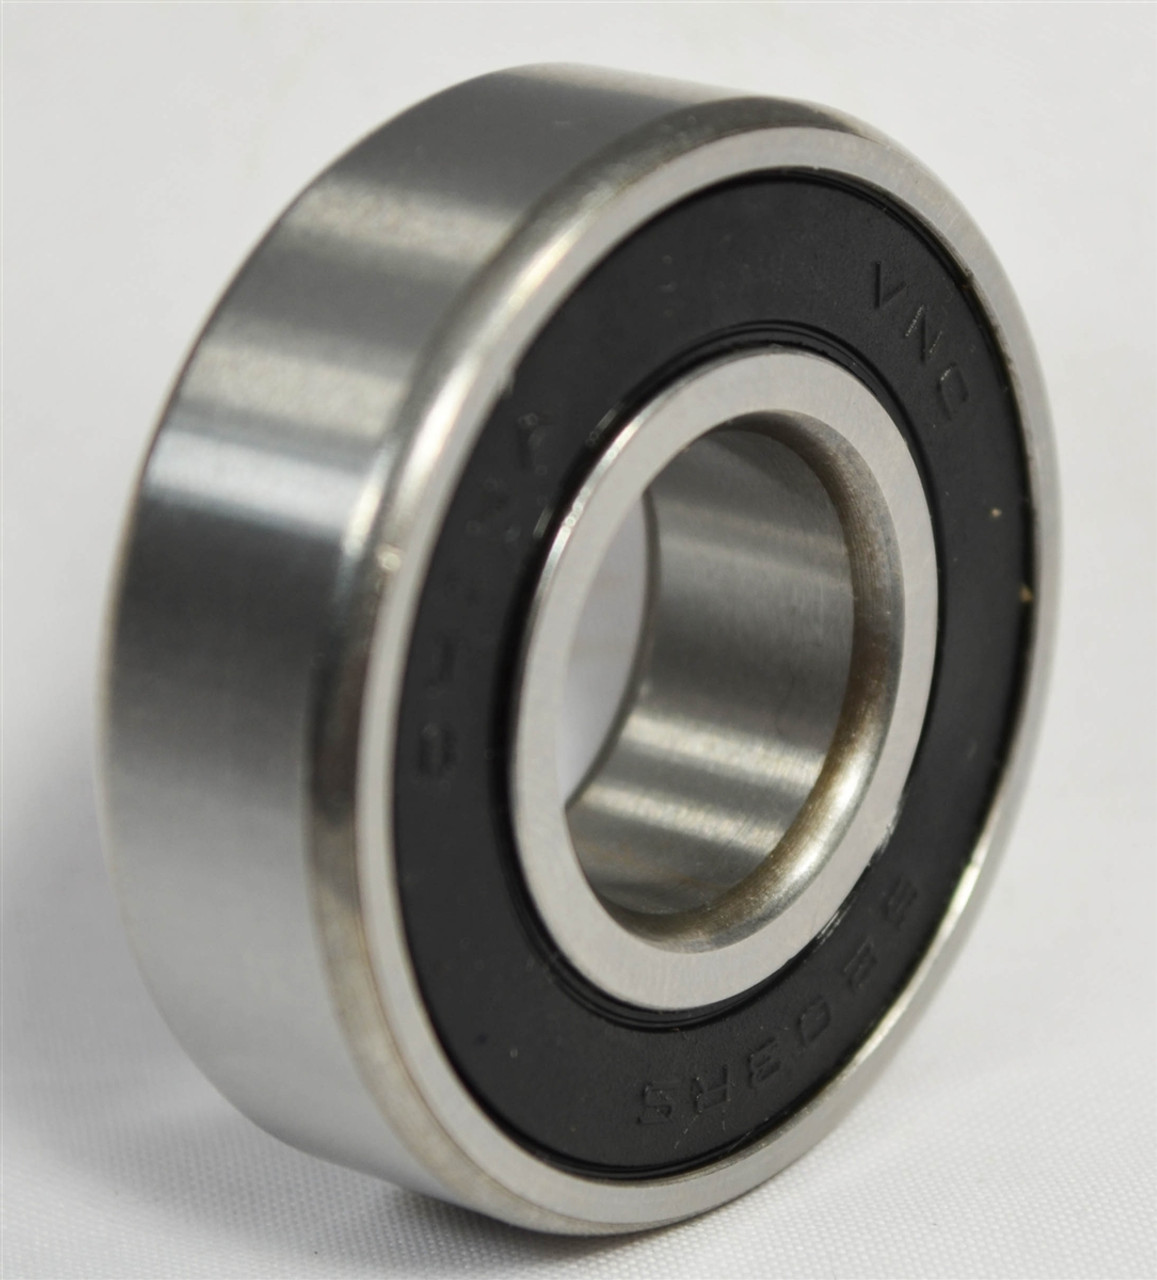 1633-2RS - Rubber Seals